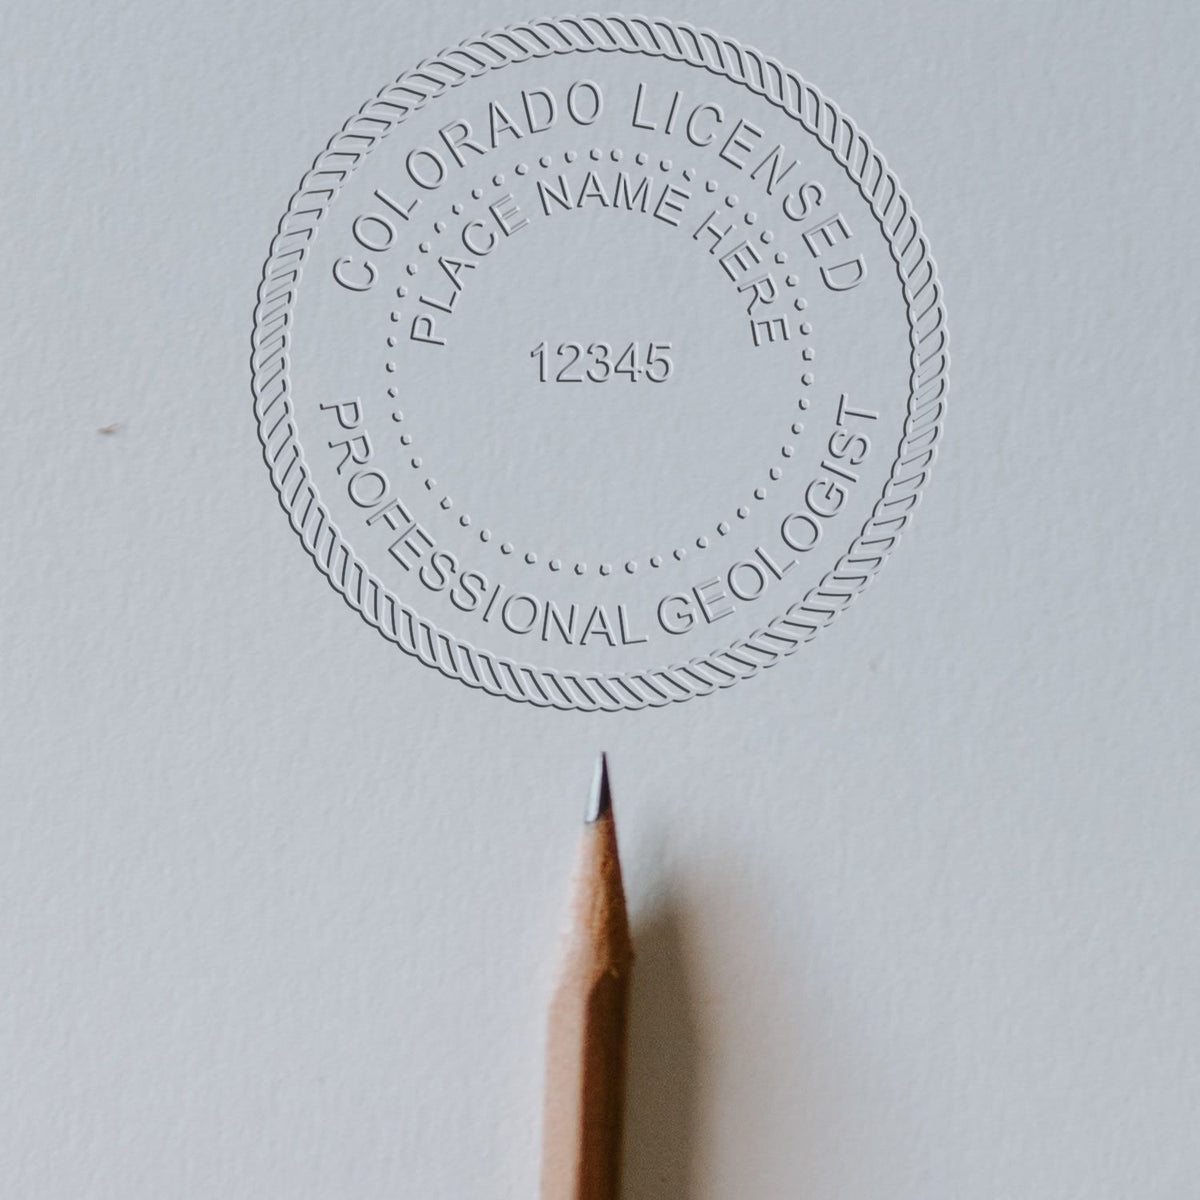 A photograph of the Soft Colorado Professional Geologist Seal stamp impression reveals a vivid, professional image of the on paper.